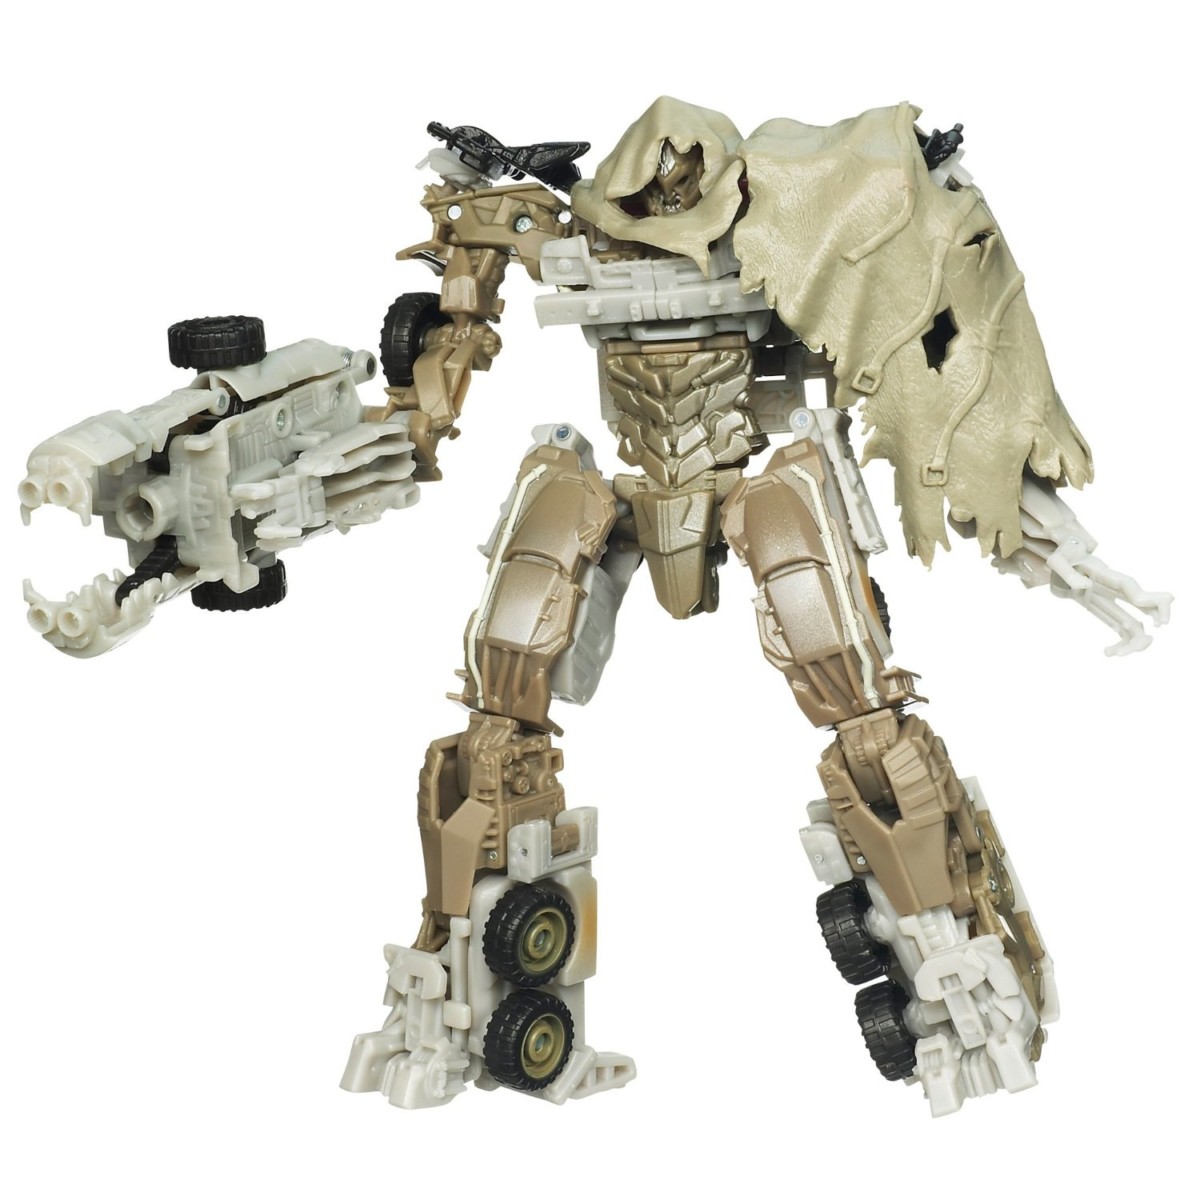 Transformers Dark OF THE Moon Mechtech Weapons System Action Figure